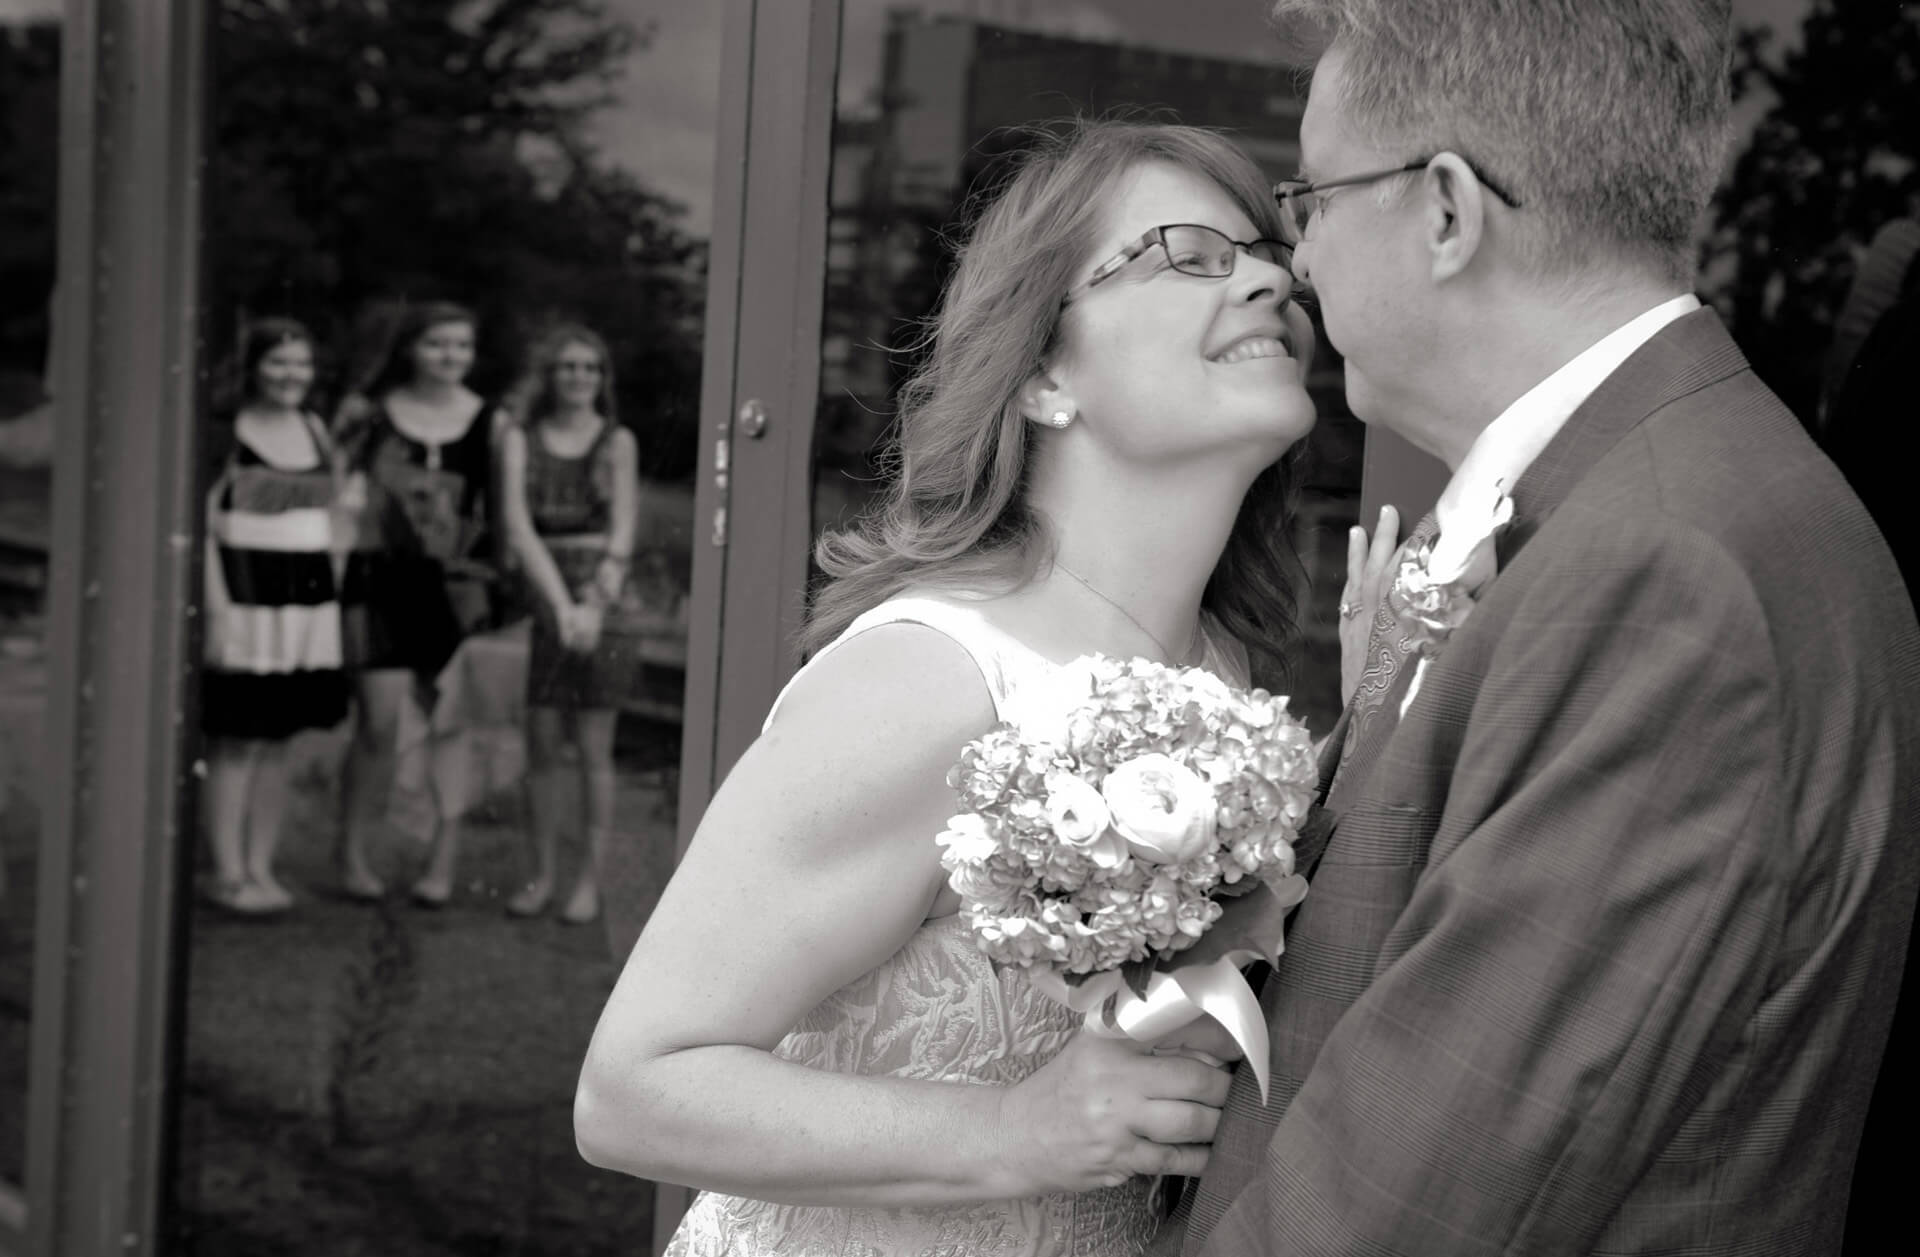 The bride and groom kiss while their kids look on in the reflection of the depot at the Gandy Dancer in Ann Arbor, Michigan.